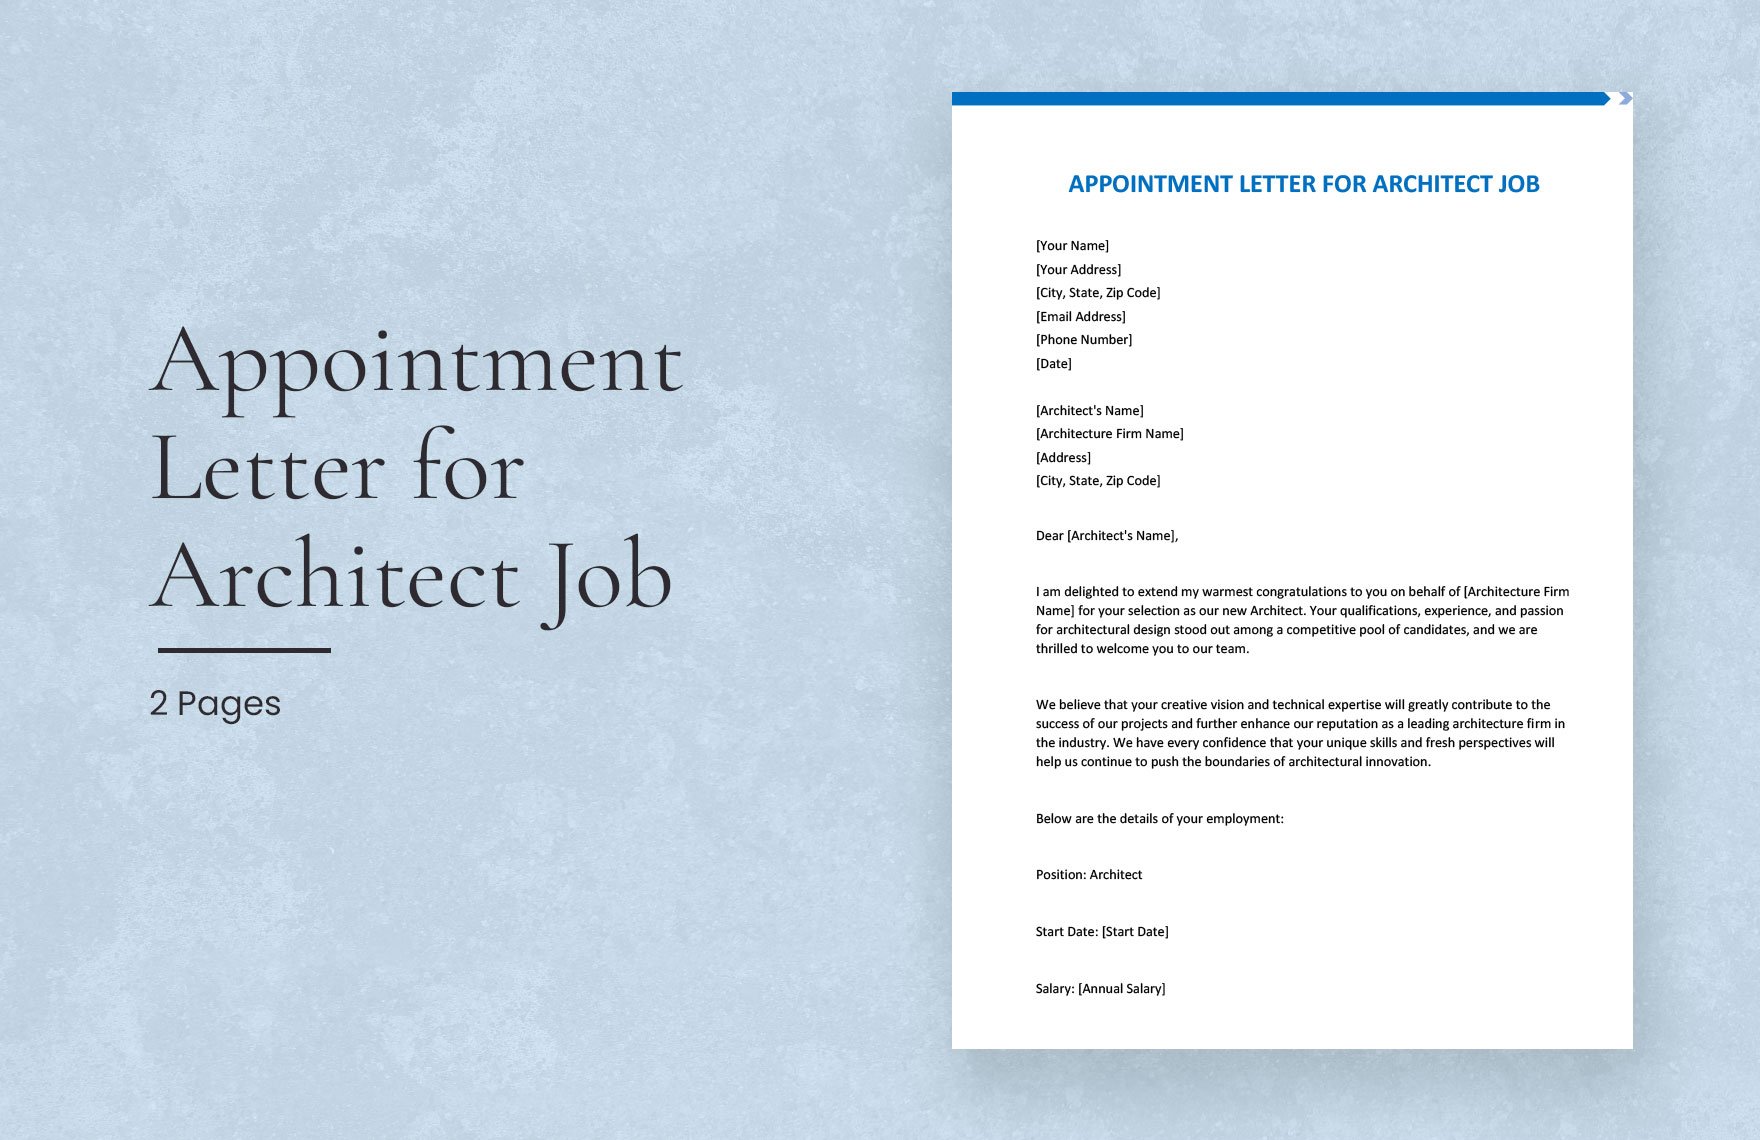 Appointment Letter for Architect Job